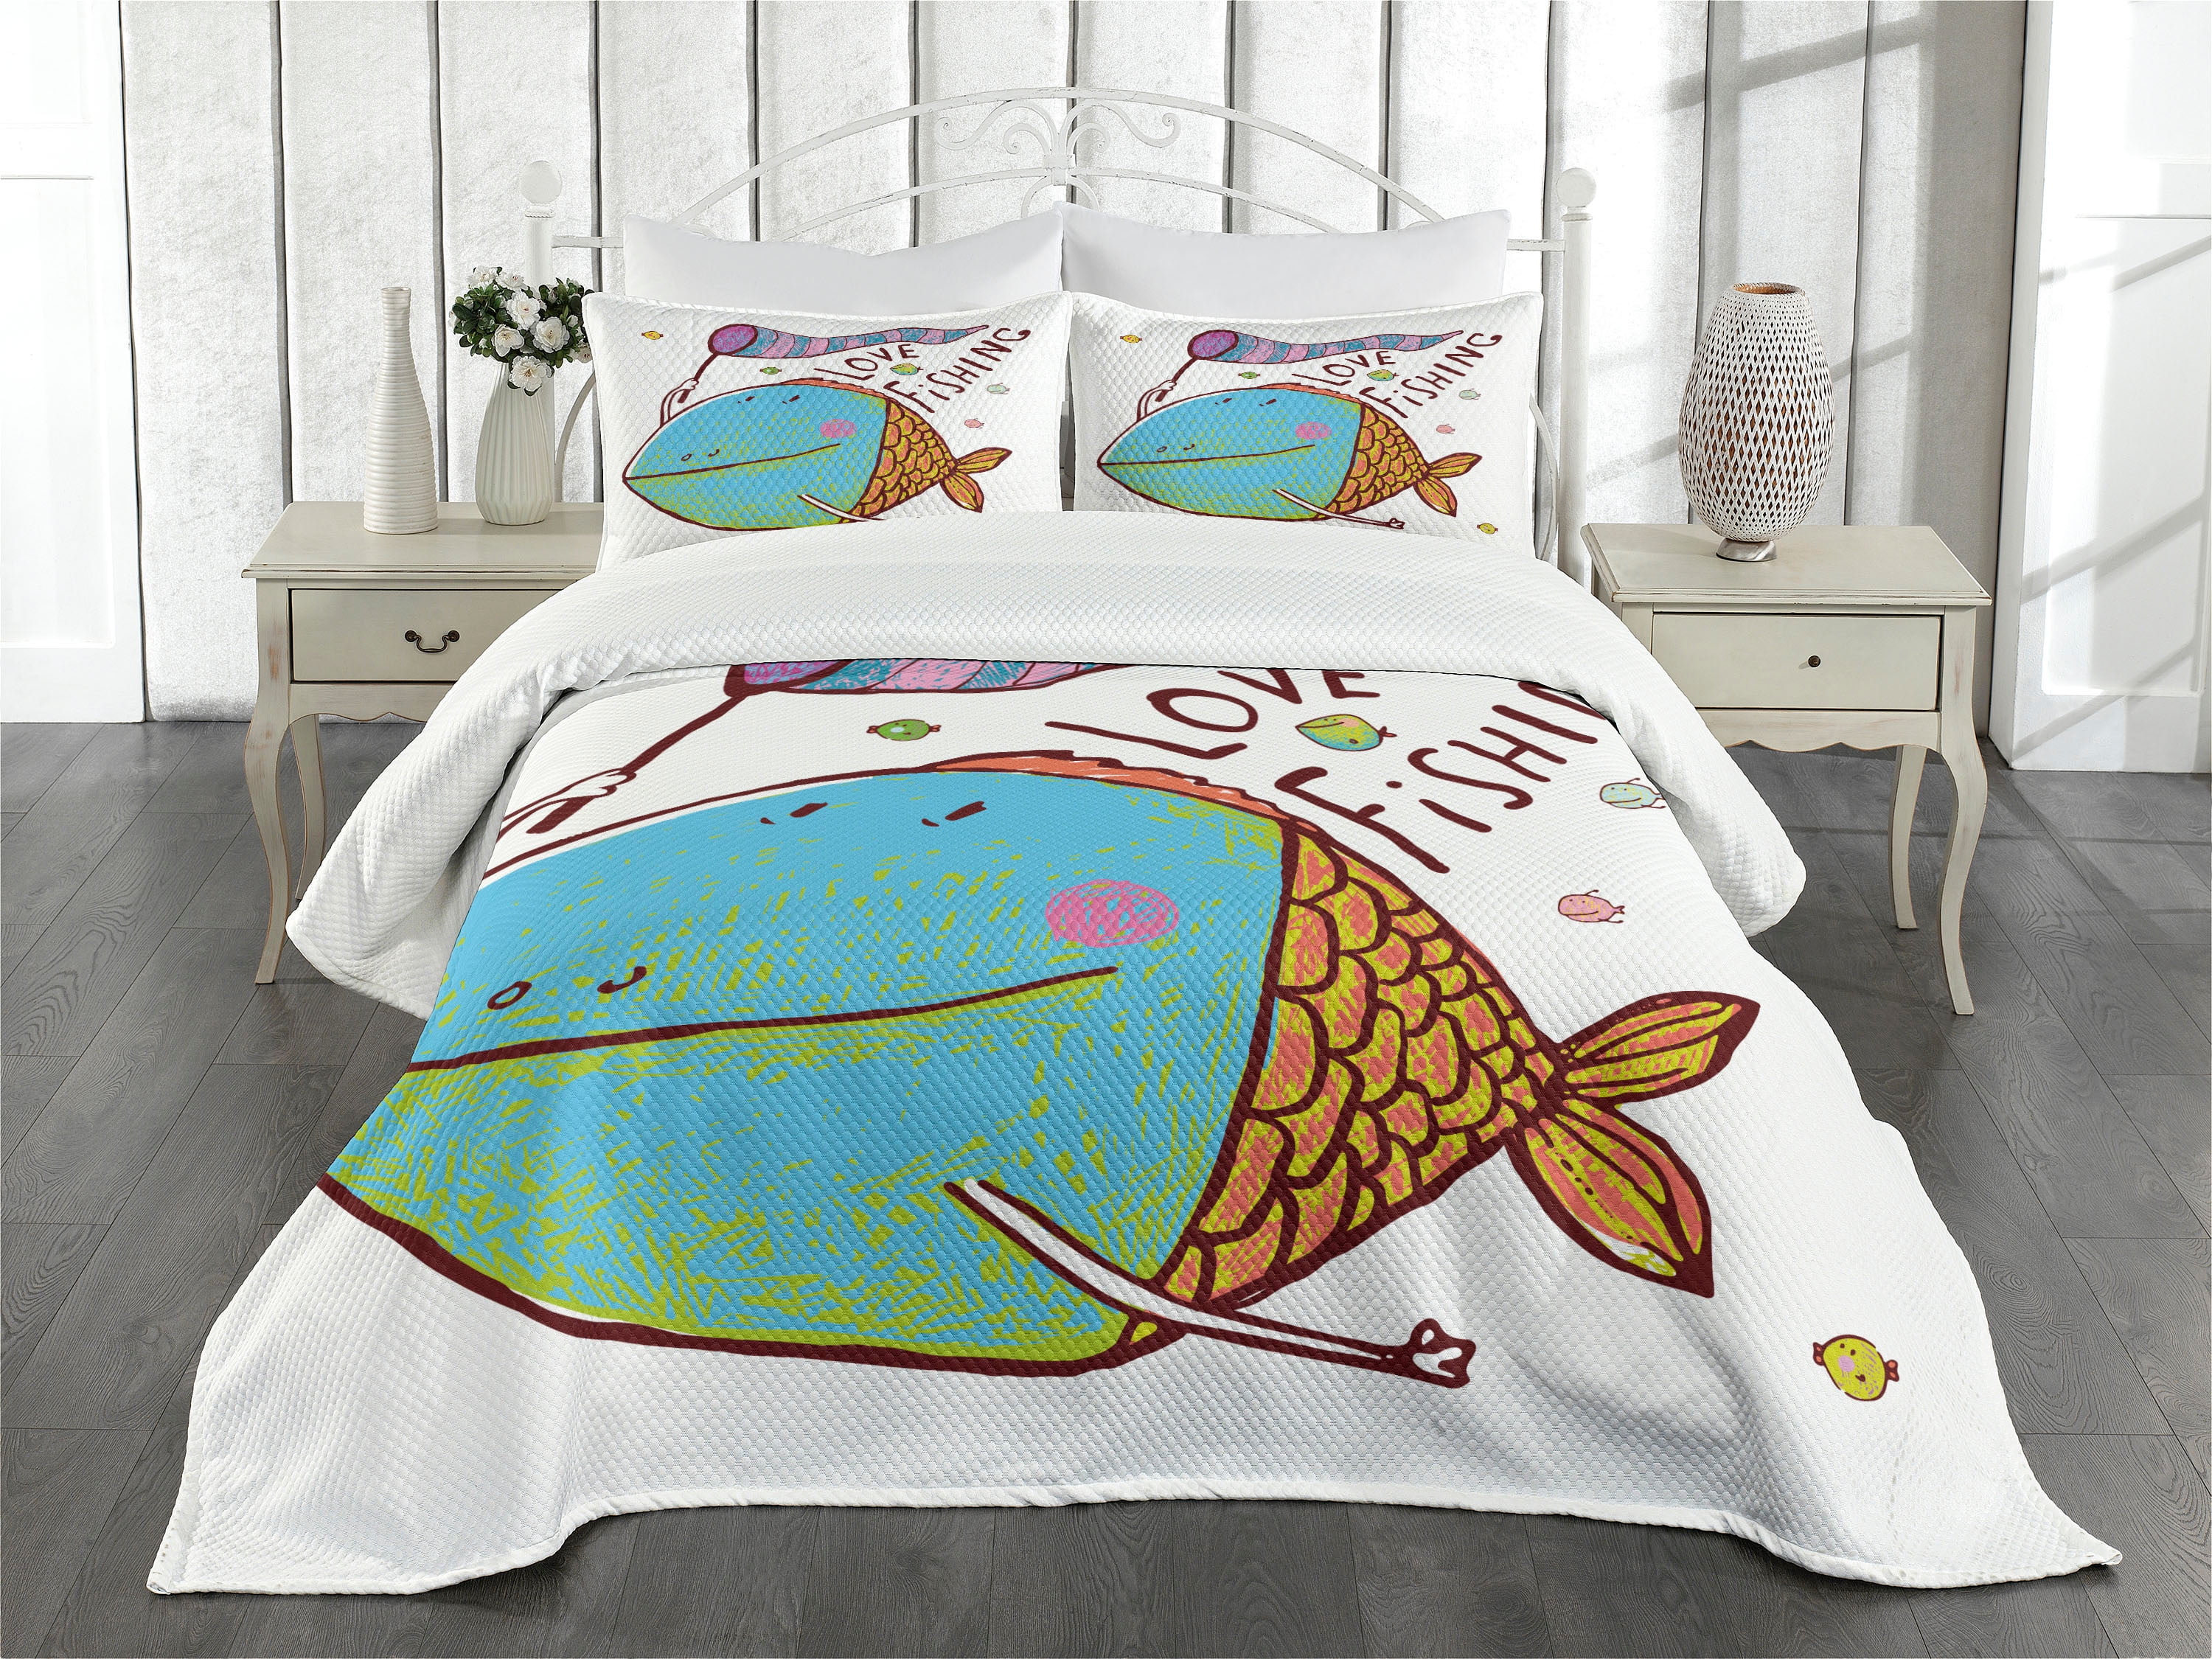 Fishing Bedspread Set King Size, Kids Cute Large Fat Fish Holding a Flag  with Love Quote Humor Fun Nursery Theme, Quilted 3 Piece Decor Coverlet Set  with 2 Pillow Shams, Multicolor, by